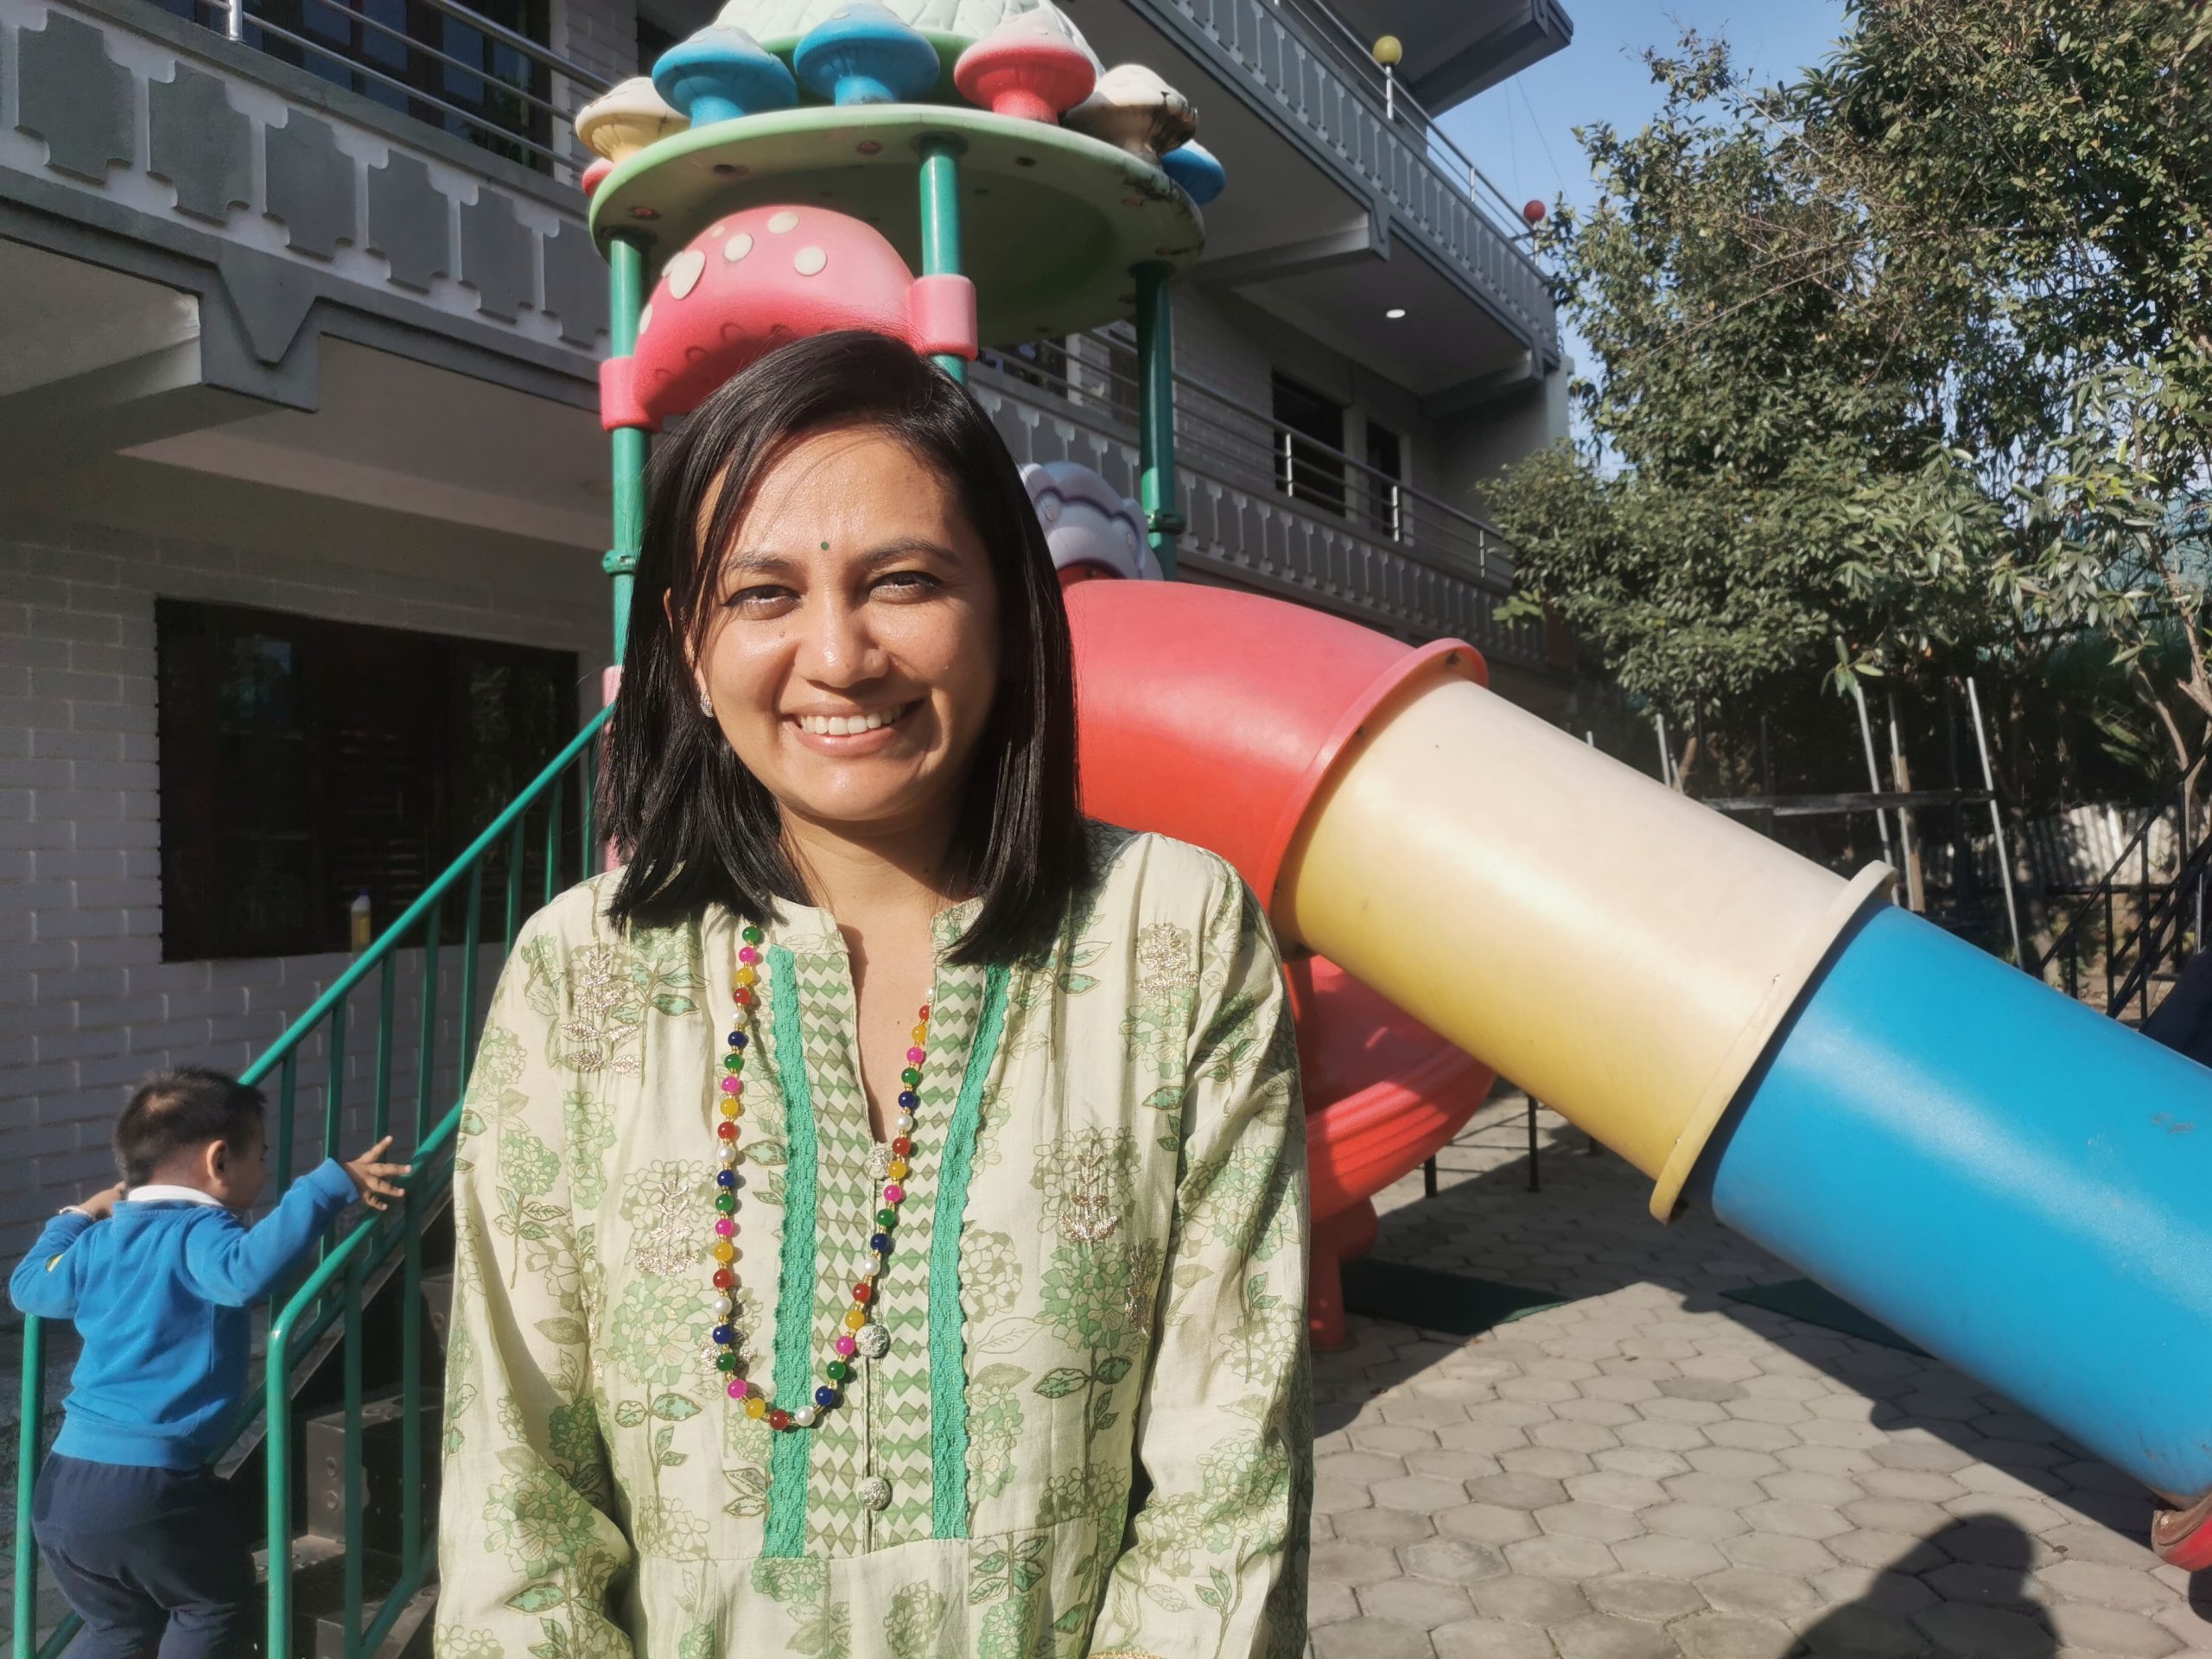 Sangita has black shoulder length hair, she smiles into the camera. behind her, a small child is climbing a climbing frame.